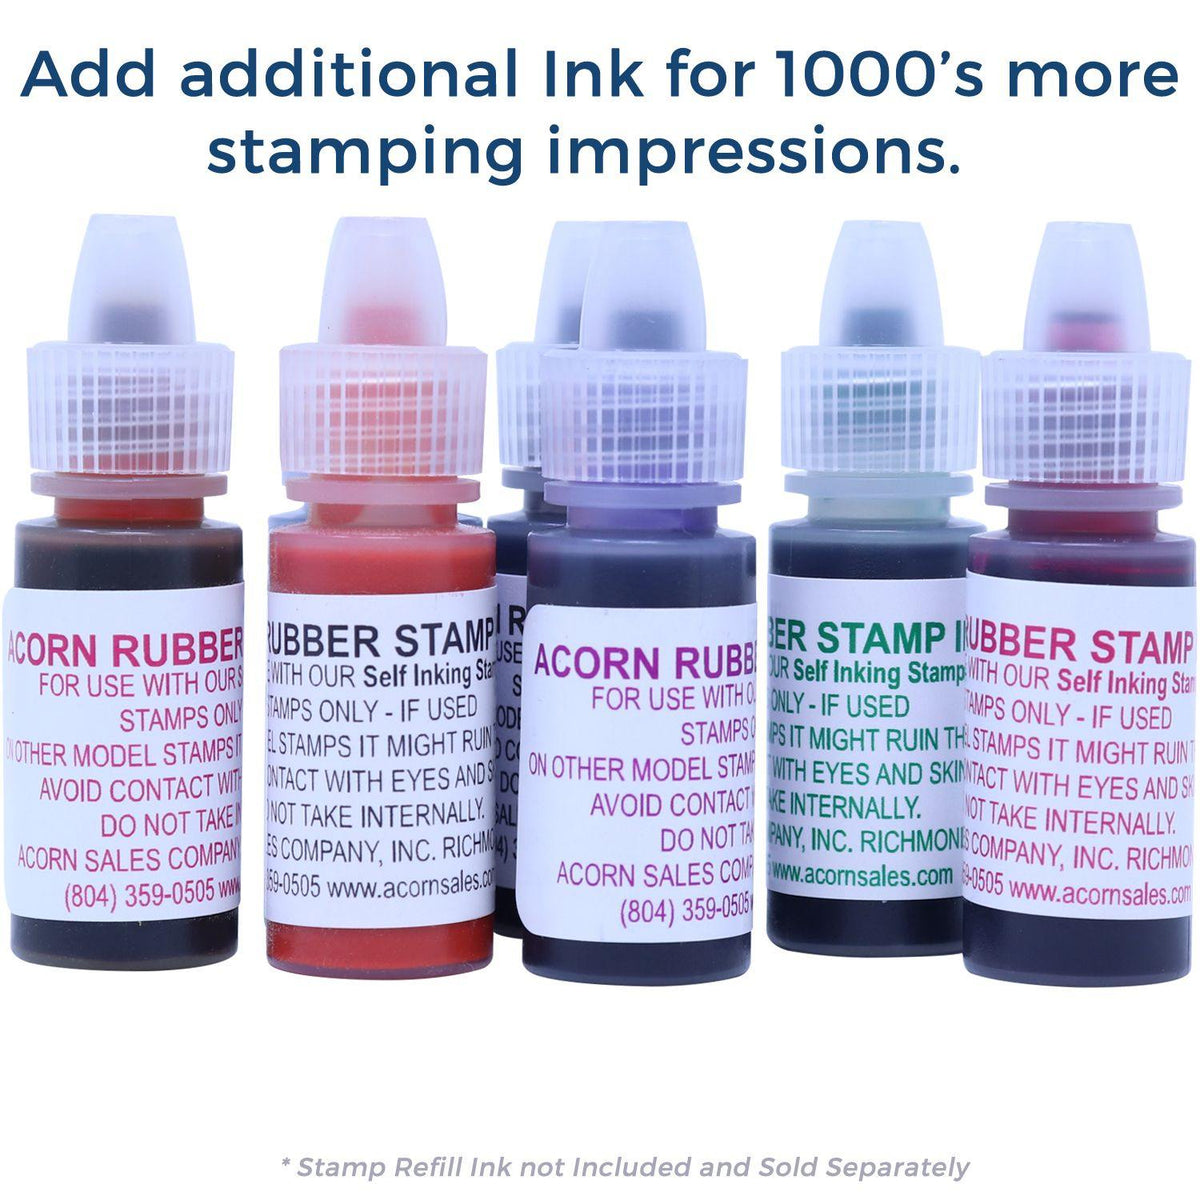 Refill Inks for Large Pre-Inked OCR Stamp Available